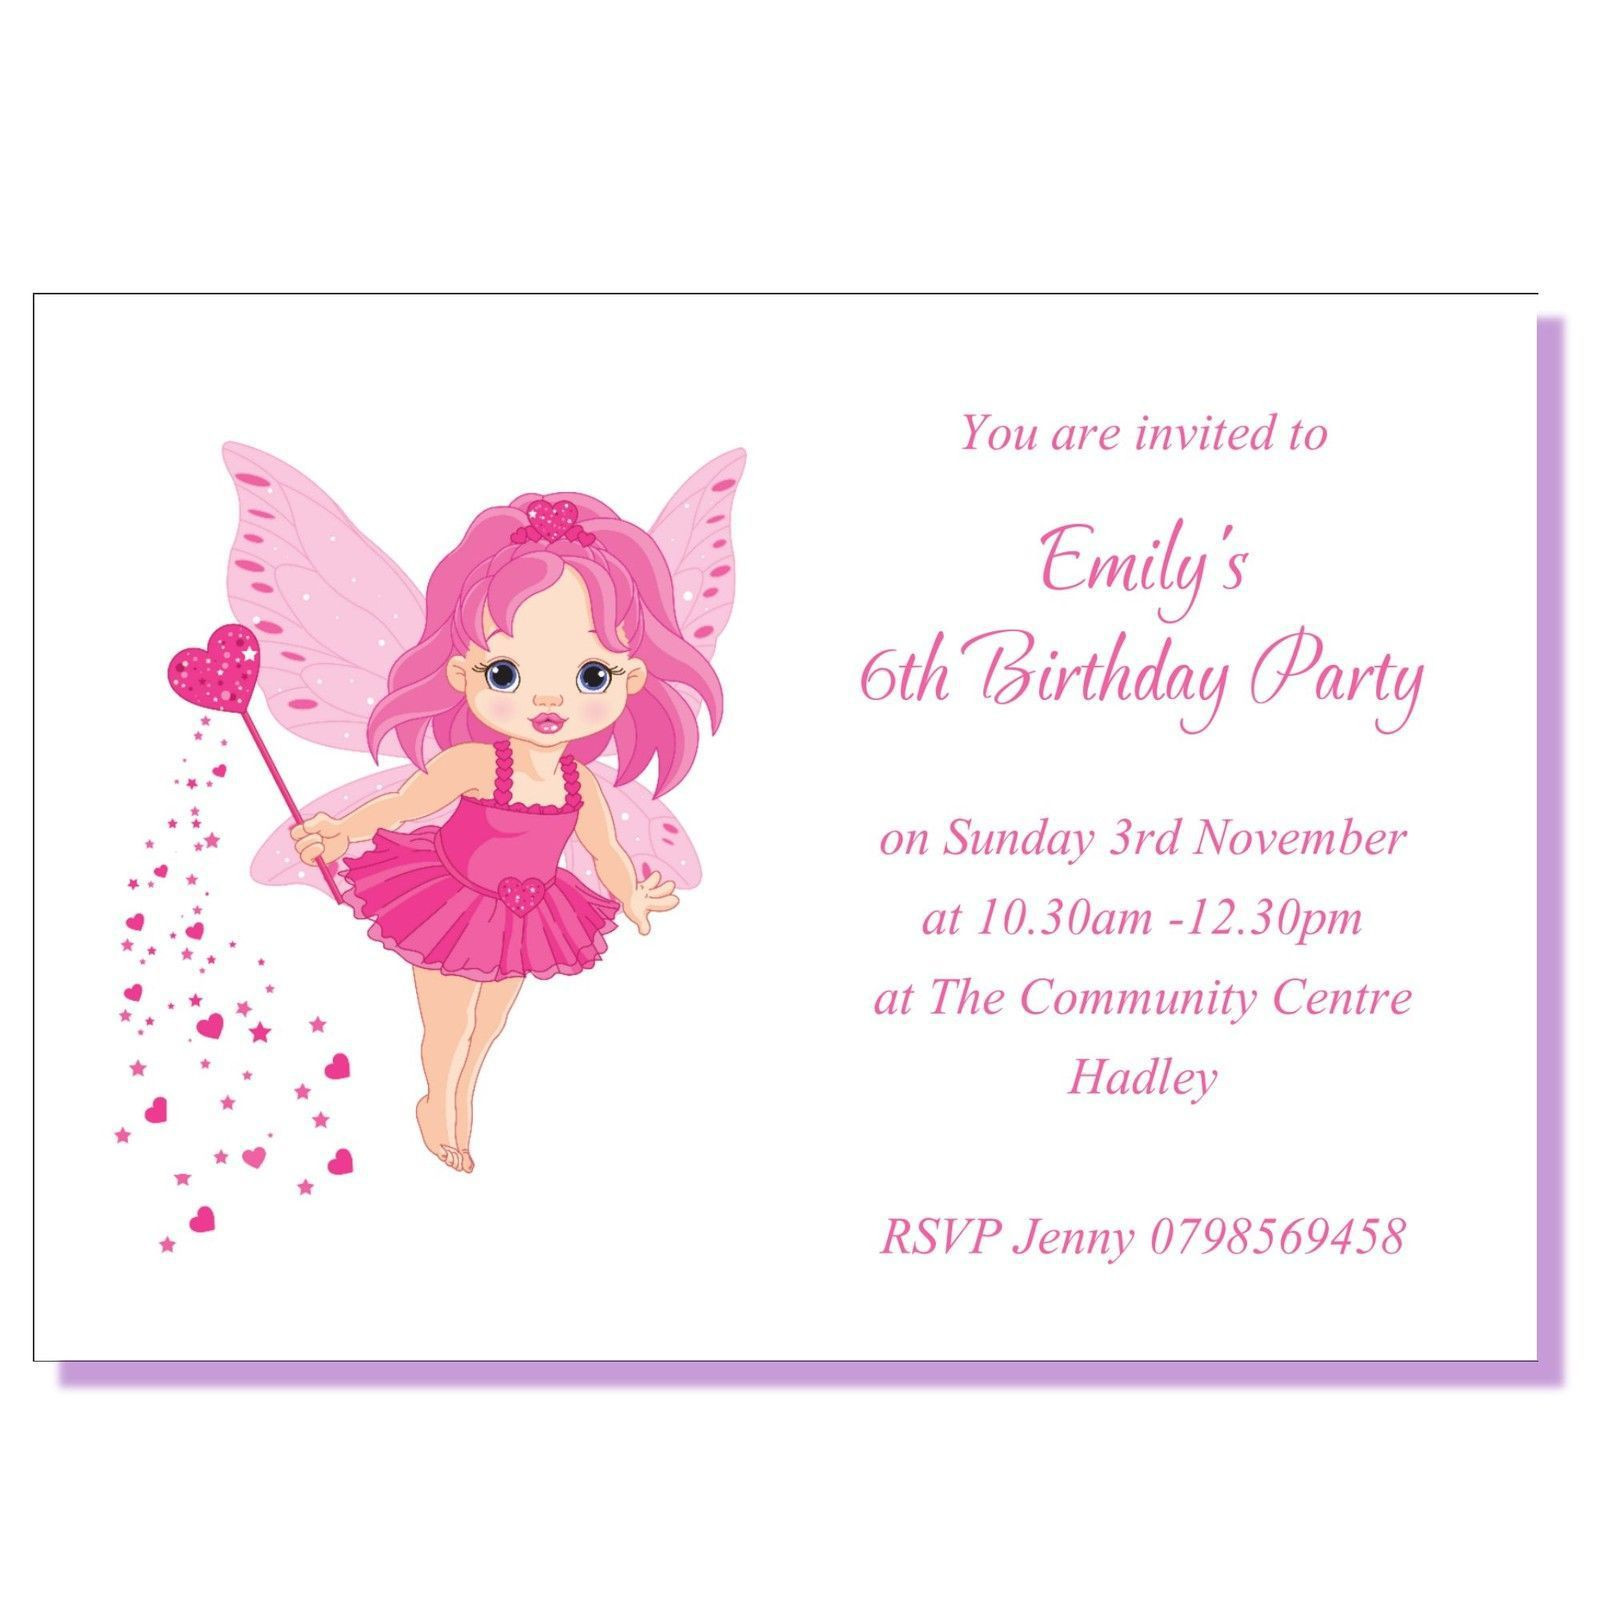 Kids Birthday Party Invitation Messages
 Childrens birthday party invites toddler birthday party